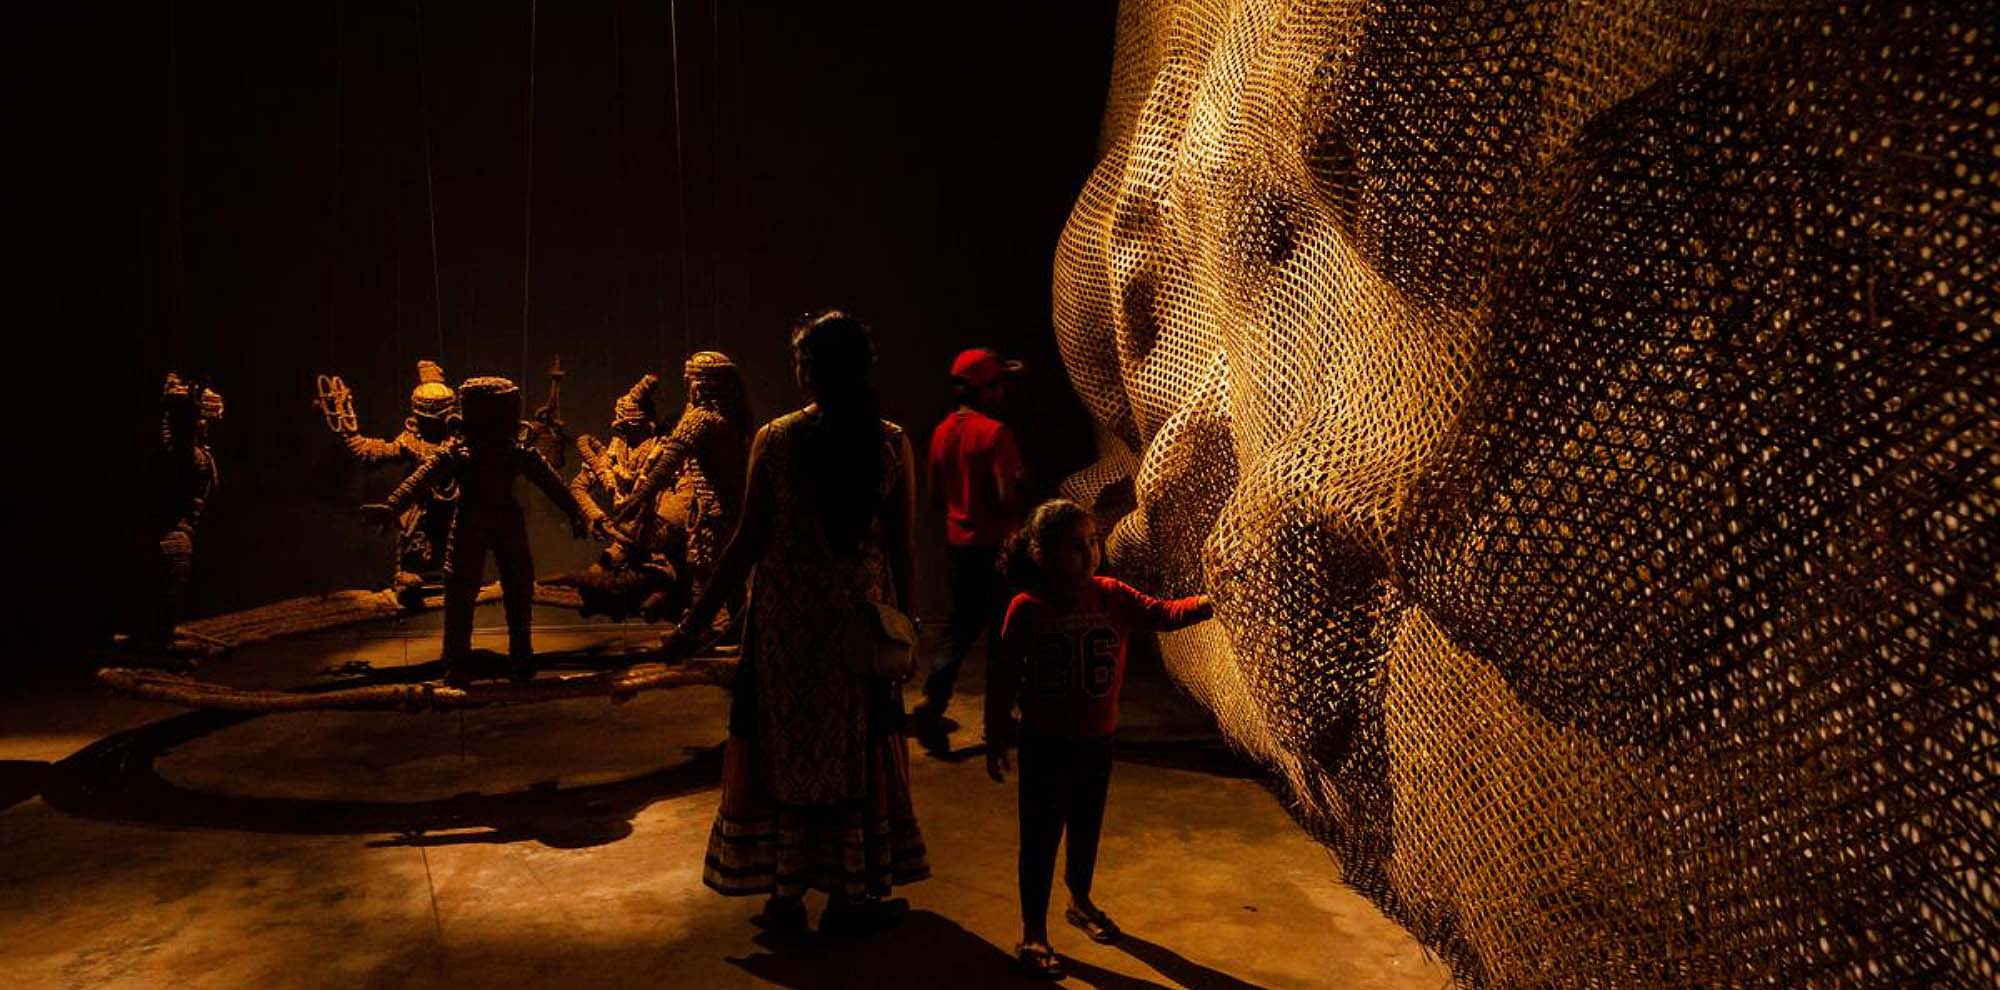 People admire a bulbous wall on the right with puppet-like sculptures made from bamboo, jute and straw standing in a circle in the background.